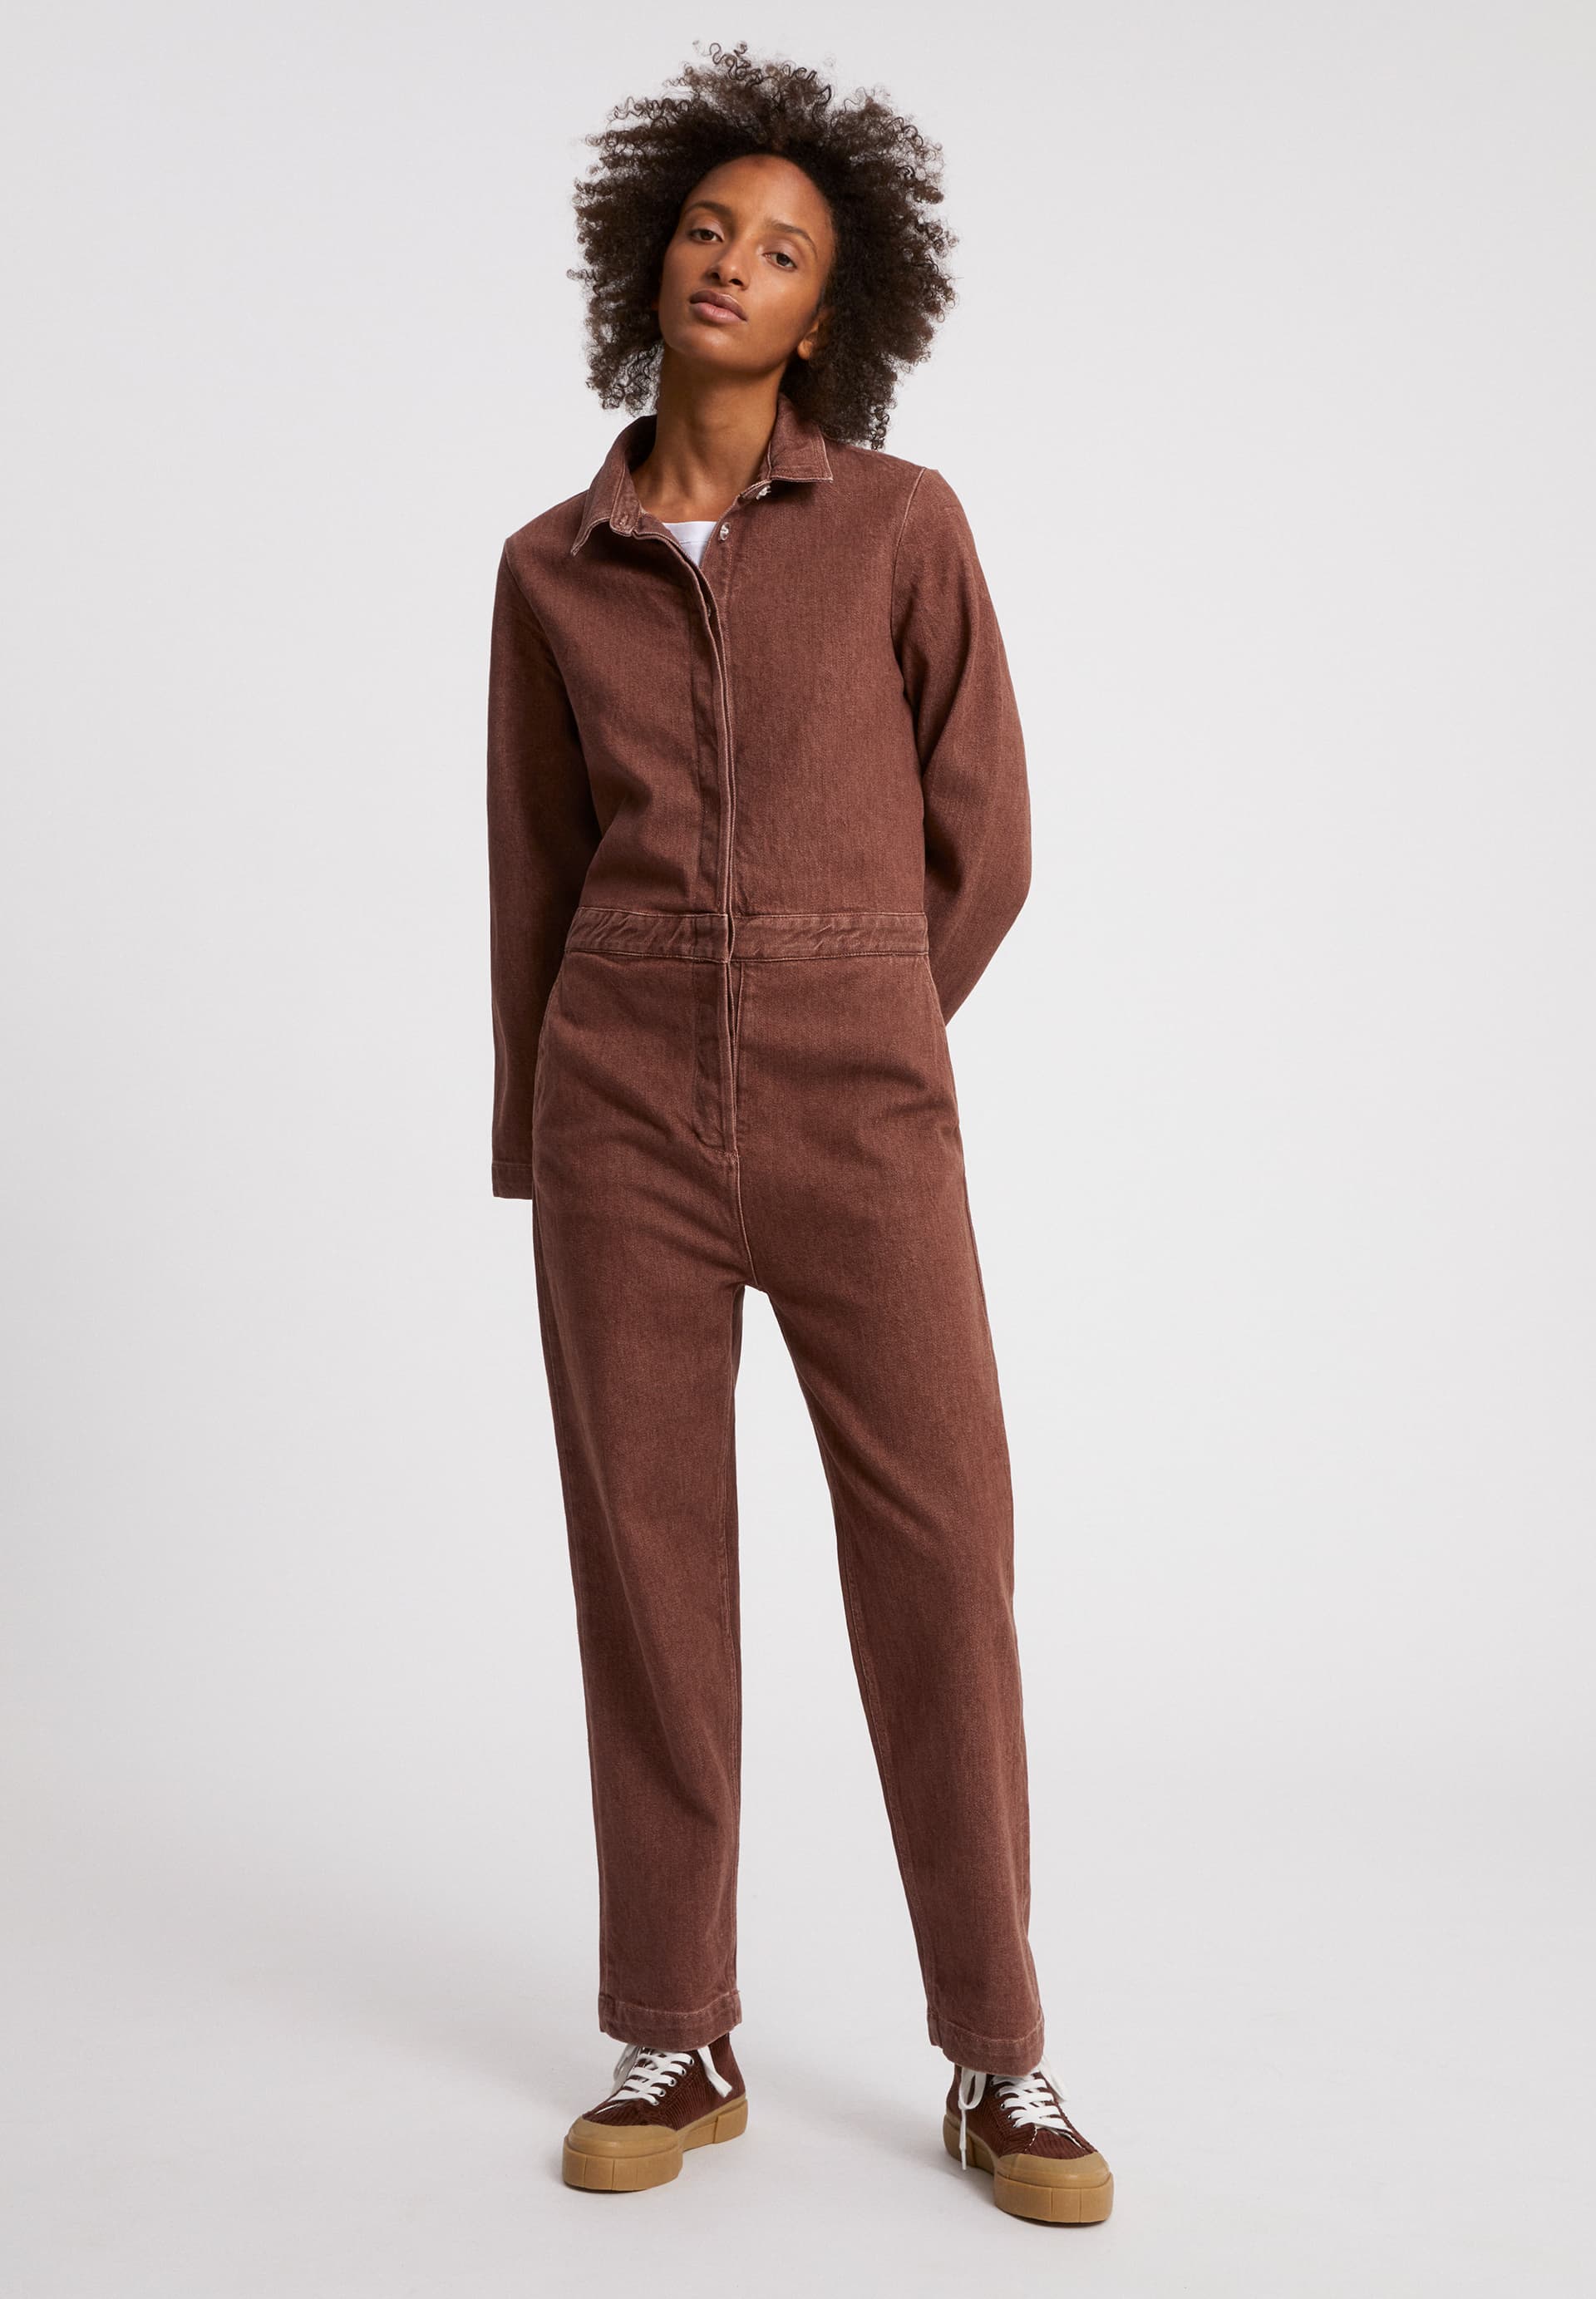 ALEAA EARTHCOLORS® Jumpsuit made of Organic Cotton Mix